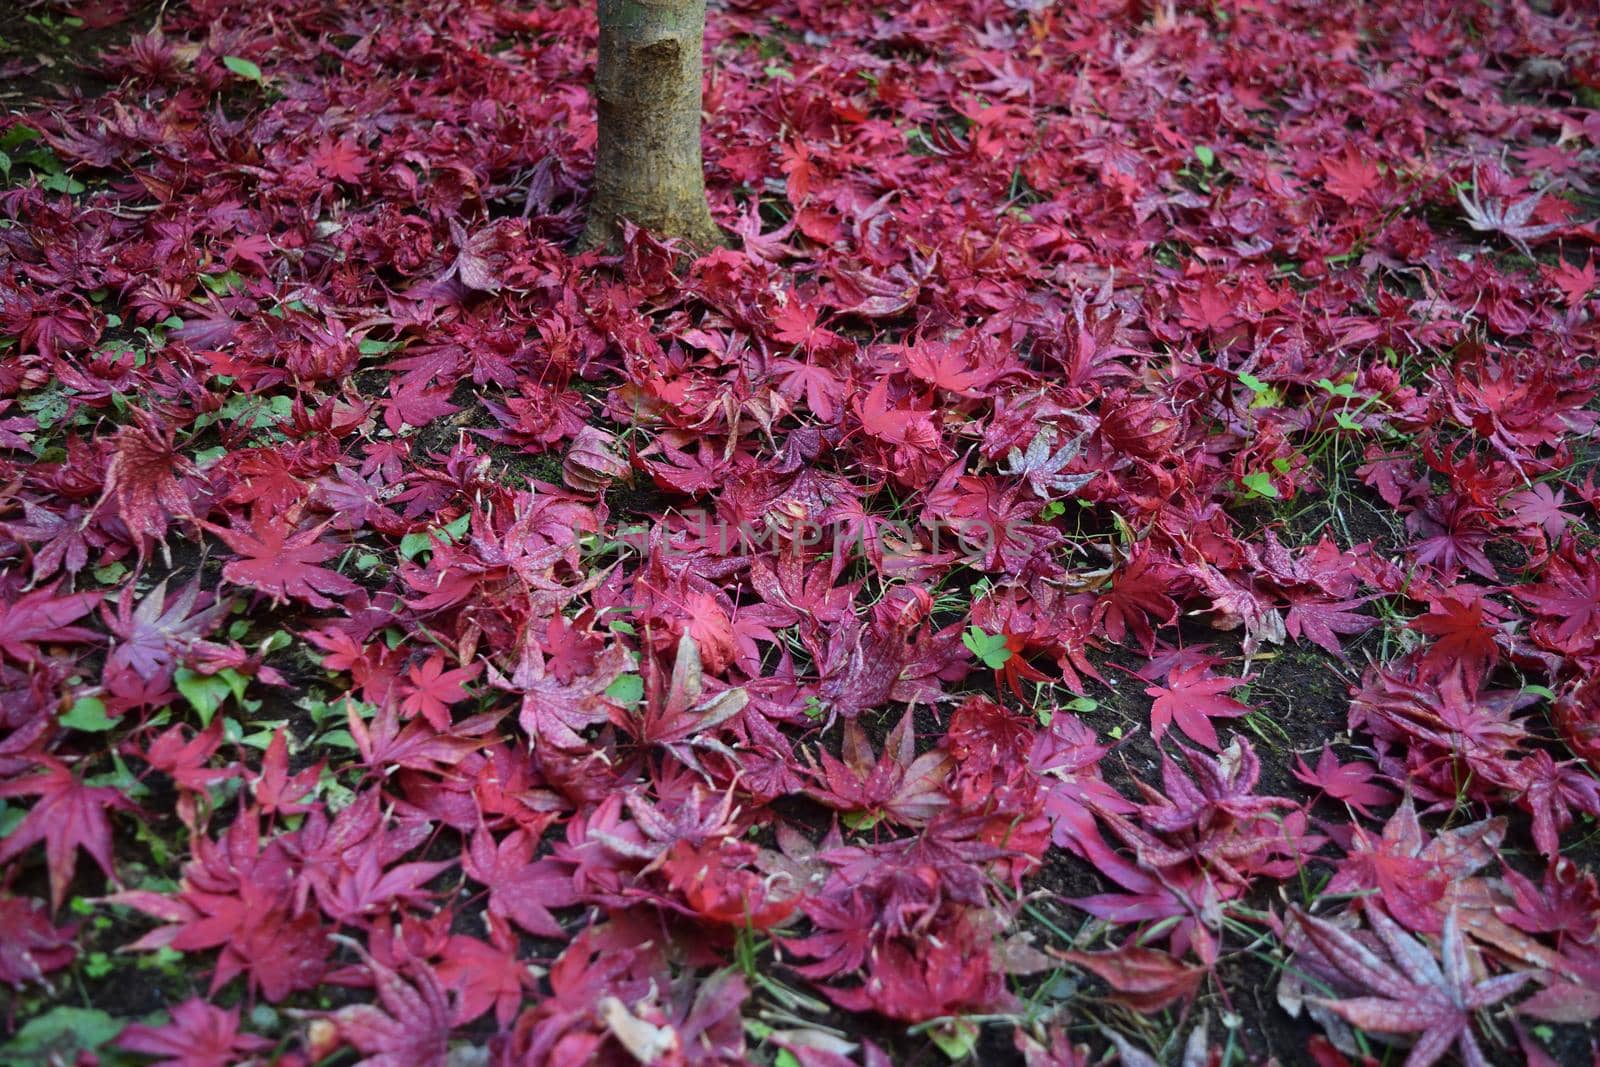 Closeup of Japanese maple leaves with classic fall colors falling to the ground.